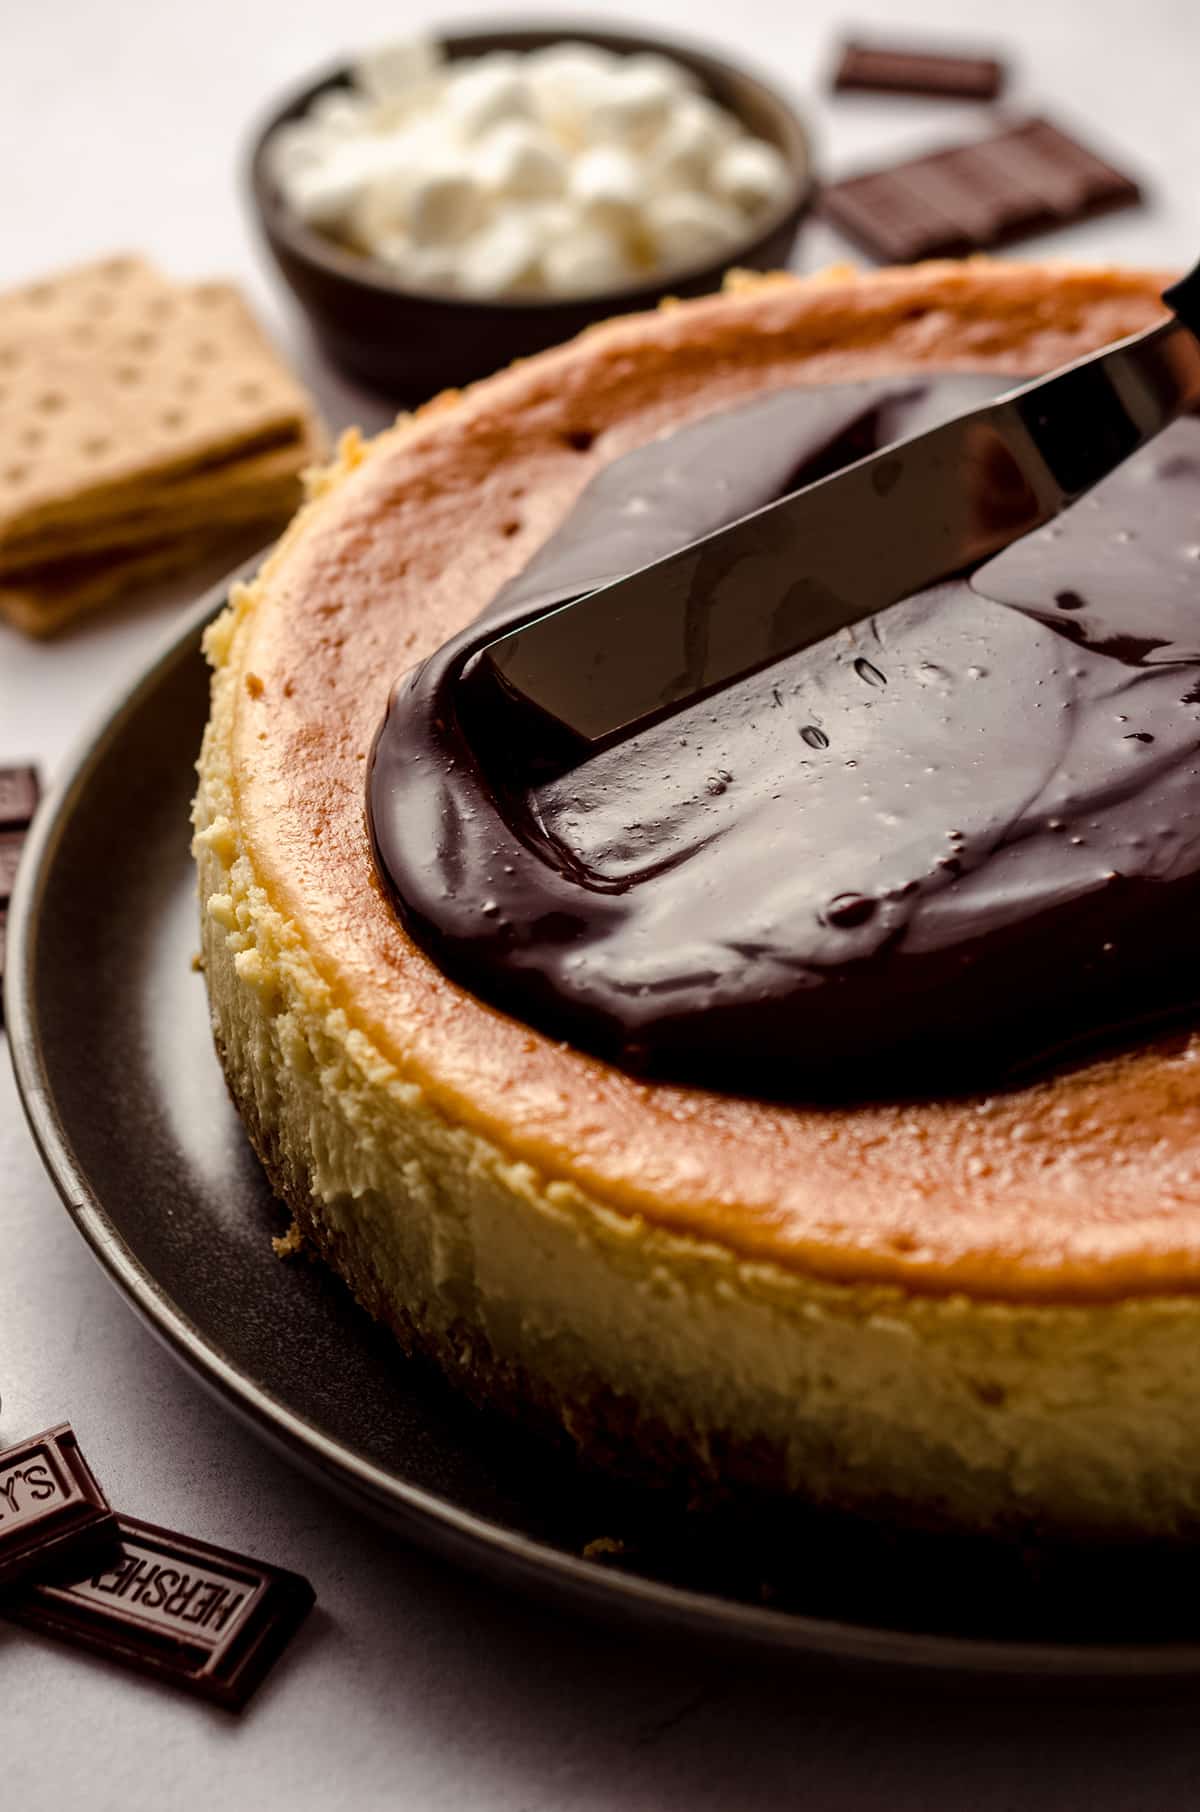 Spreading hot fudge sauce over the surface of a baked cheesecake.